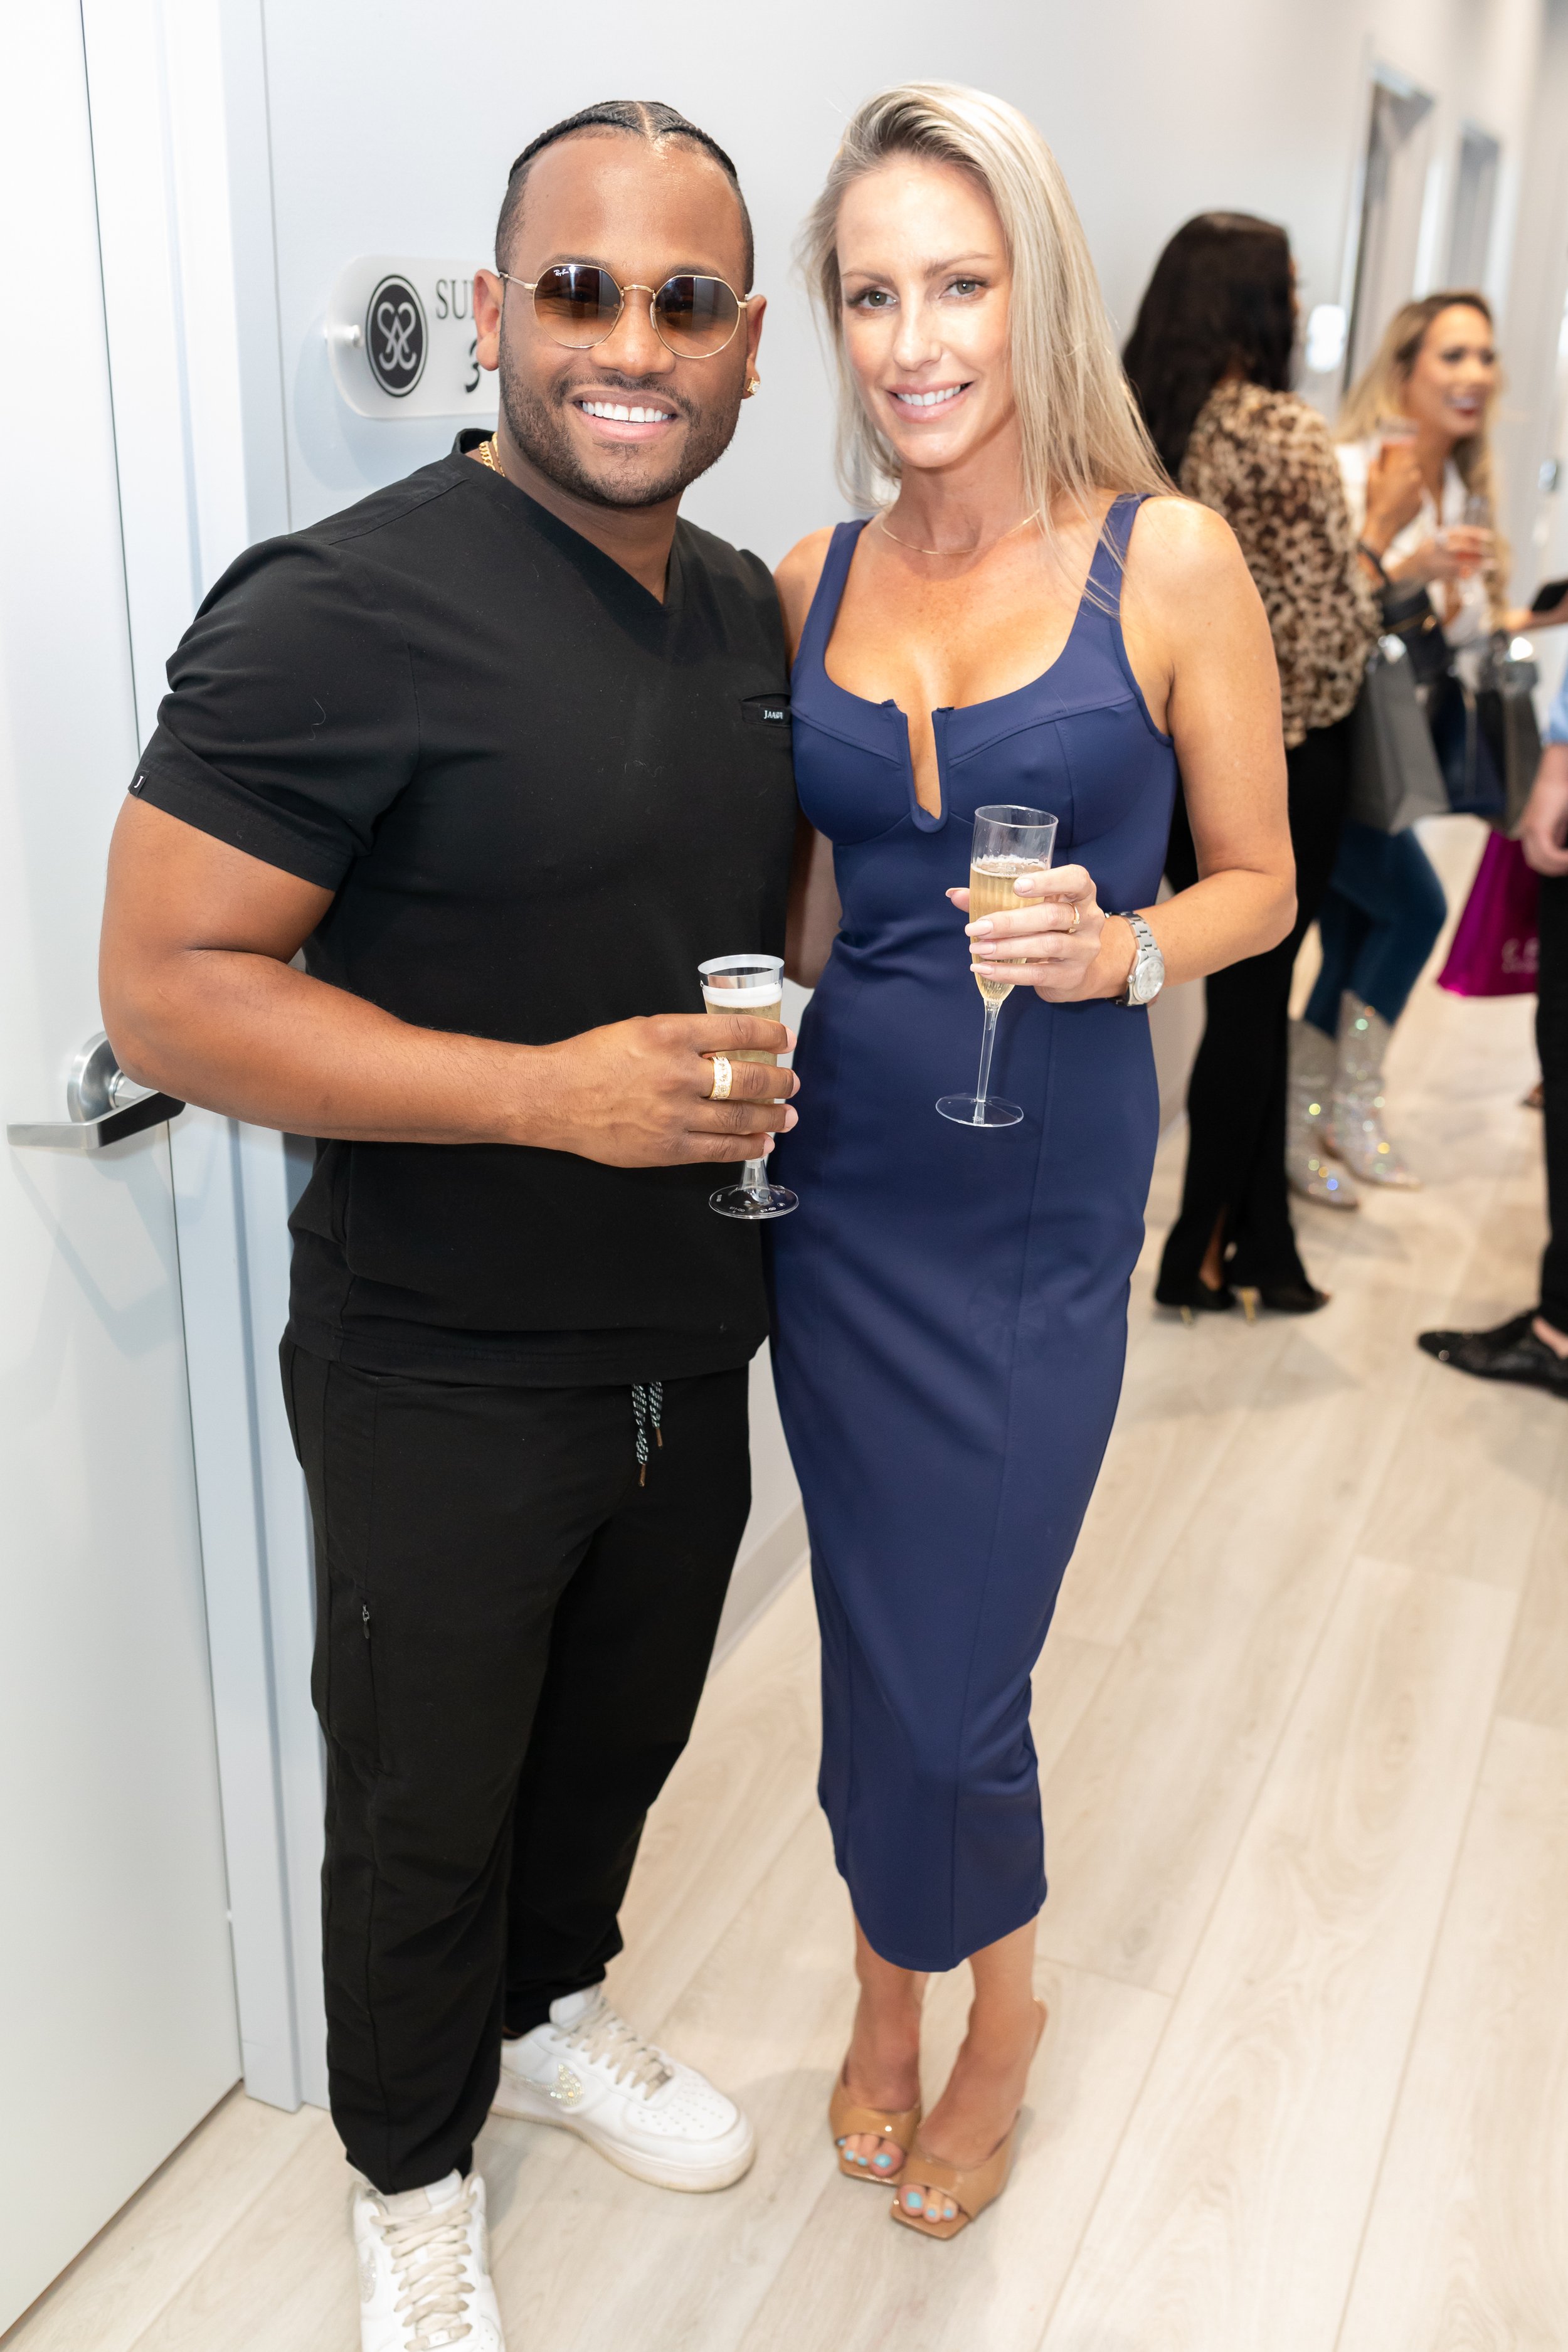 20230817-The Luxe List Atlanta-Southern Surgical Arts Beauty Bar Grand Opening-THU-BC-172.jpg